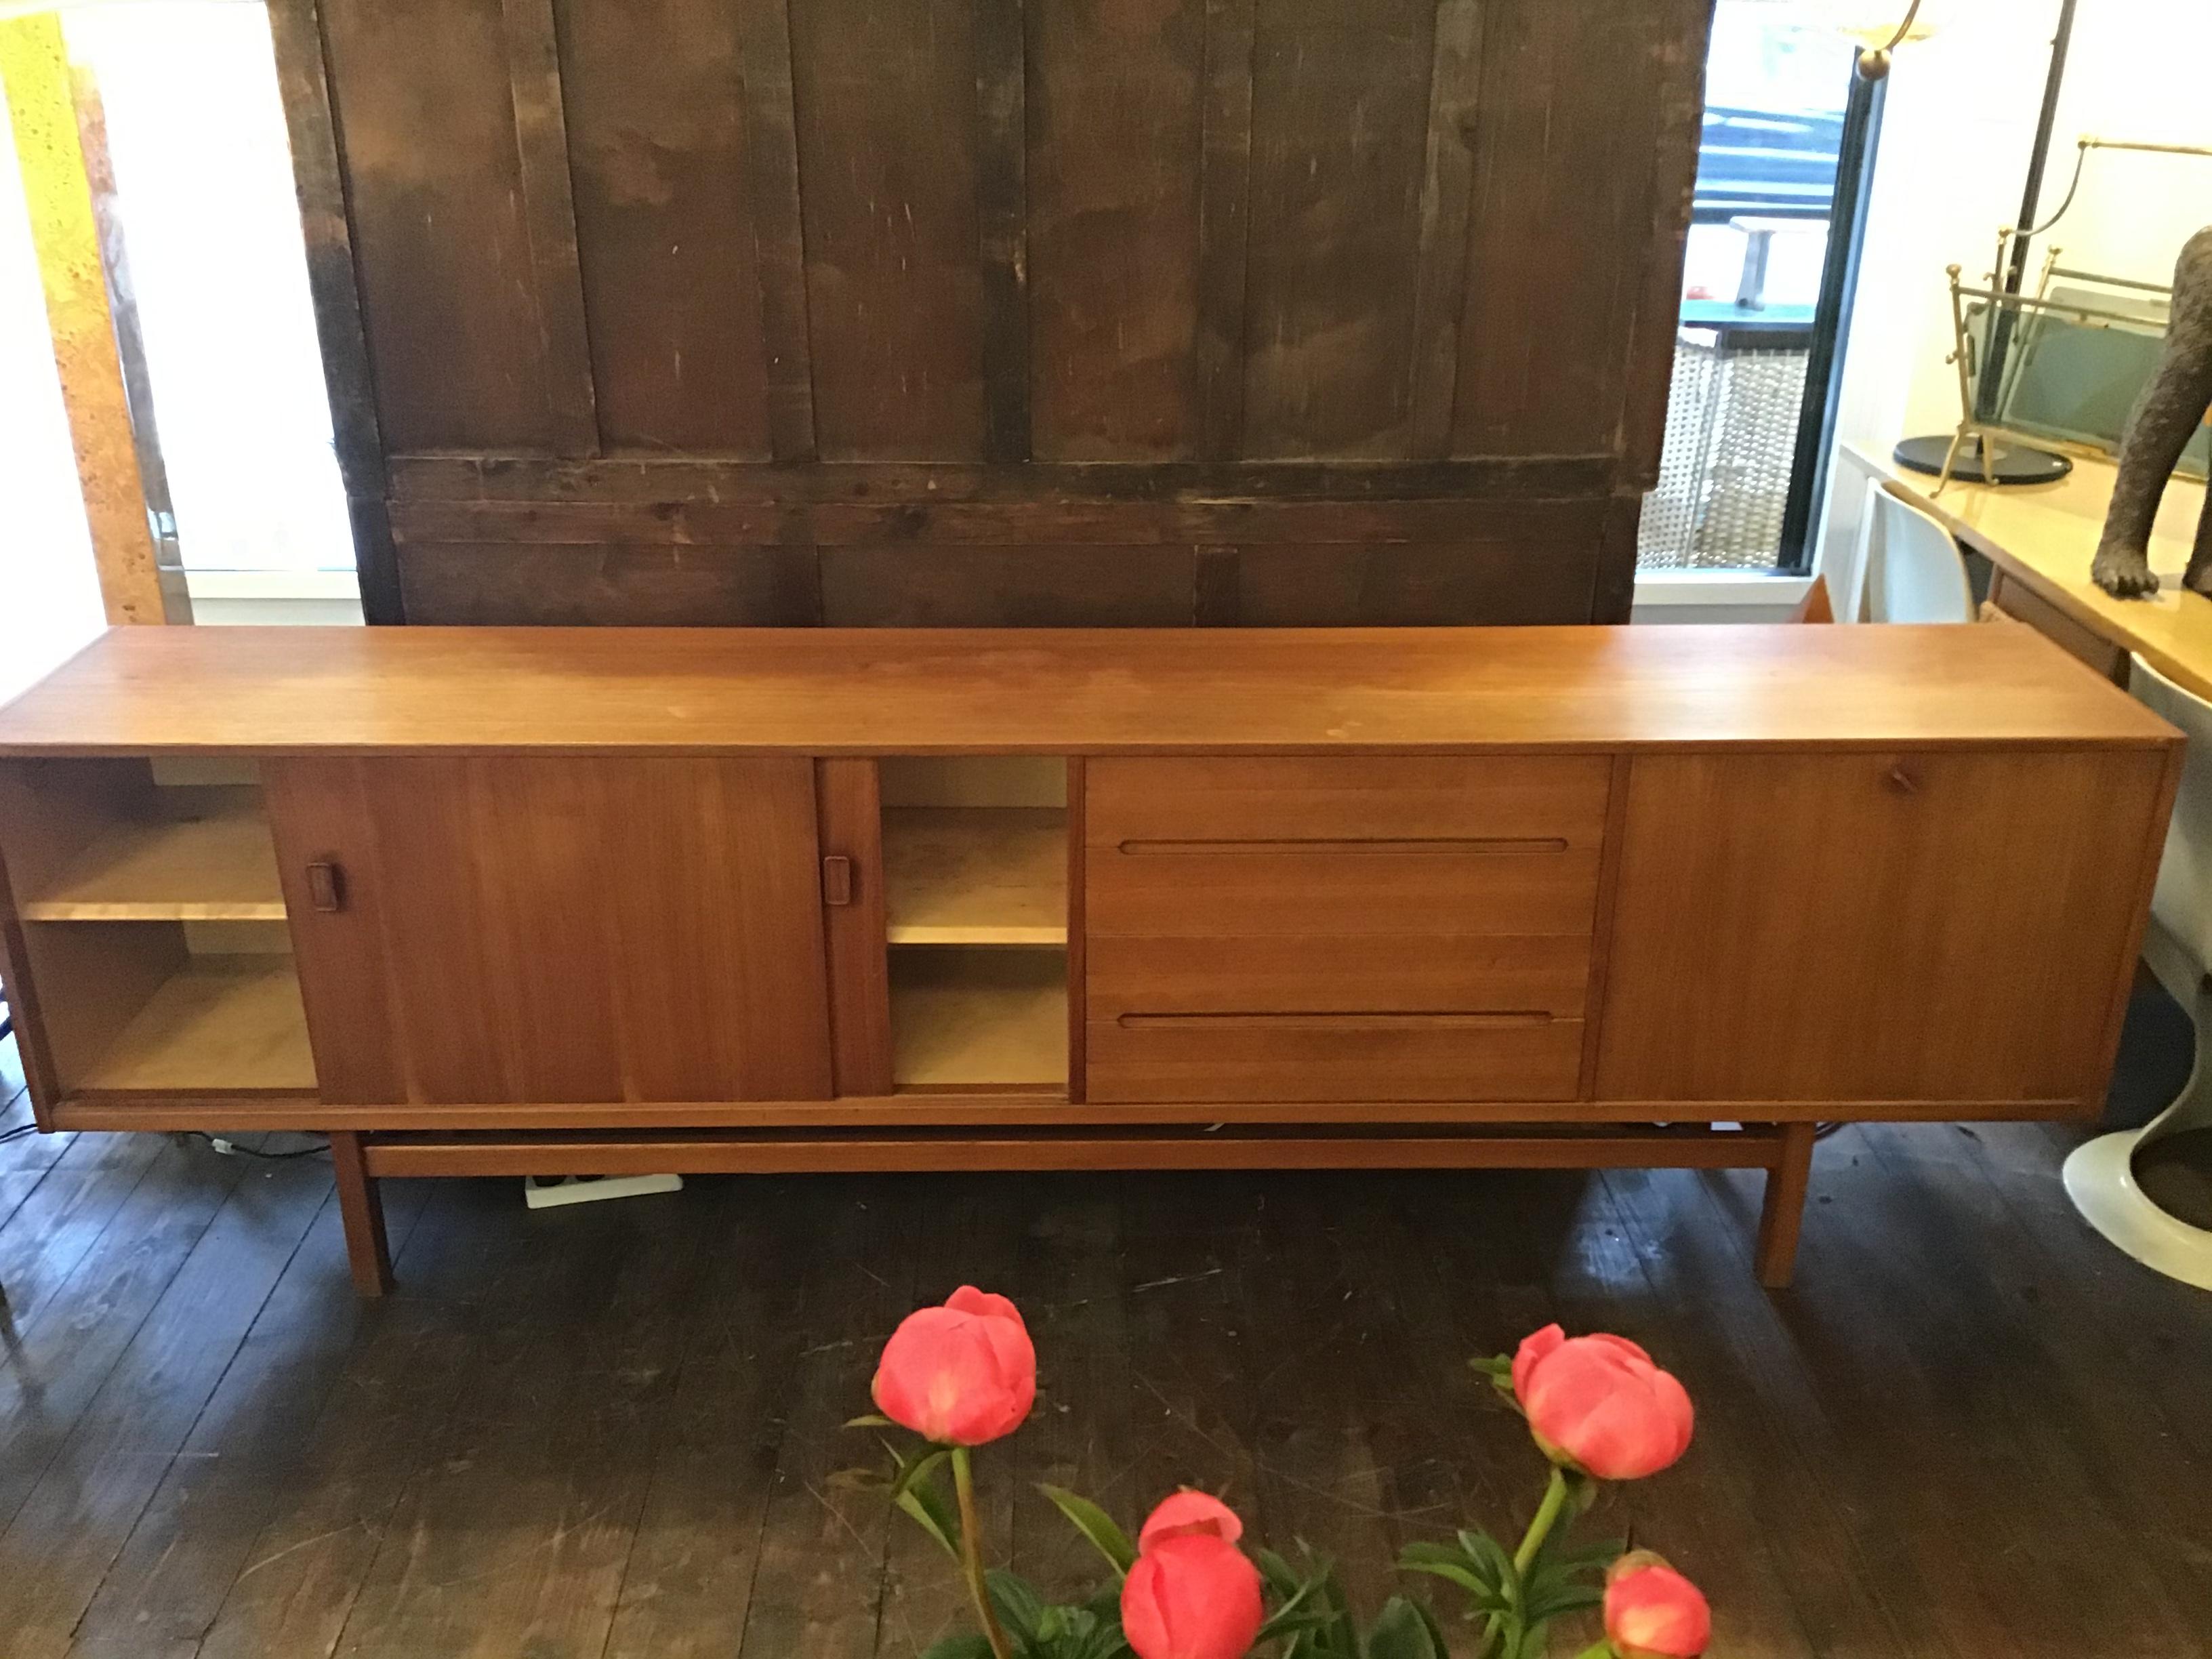 Large ’Gigant’ Nils Jonsson sideboard for Troeds Bjärnum of Sweden. Very modernist minimal look with superb attention to details featuring sleek recessed handles at the bottom of the drawers and cabinets. Great storage capacity including a bank of